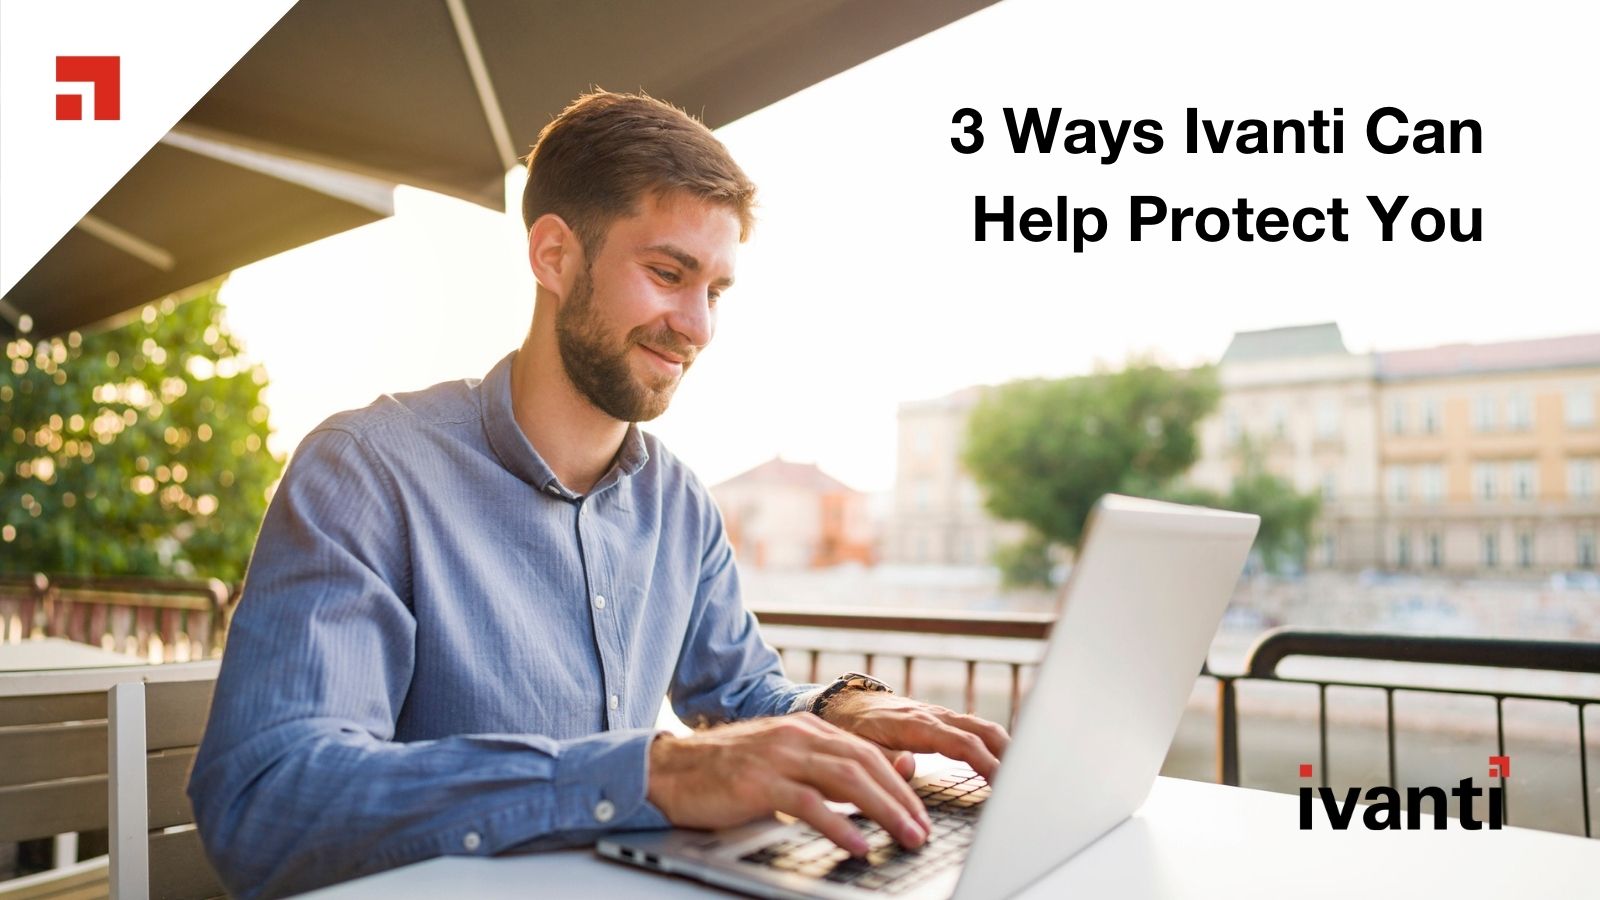 3 ways ivanti can help protect you